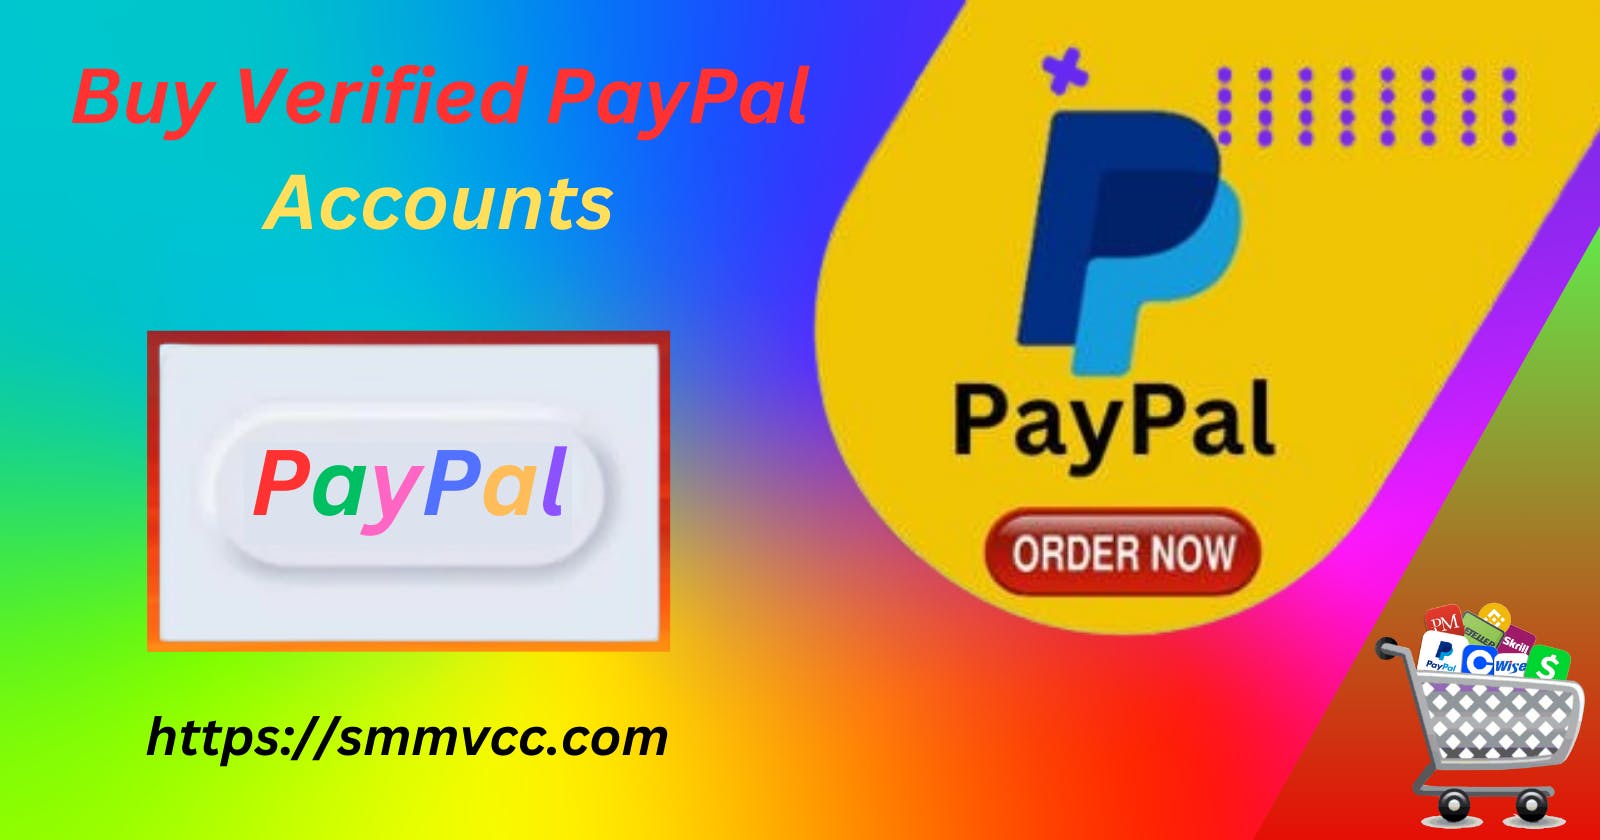 What are the Benefits of Buying Verified Paypal Account